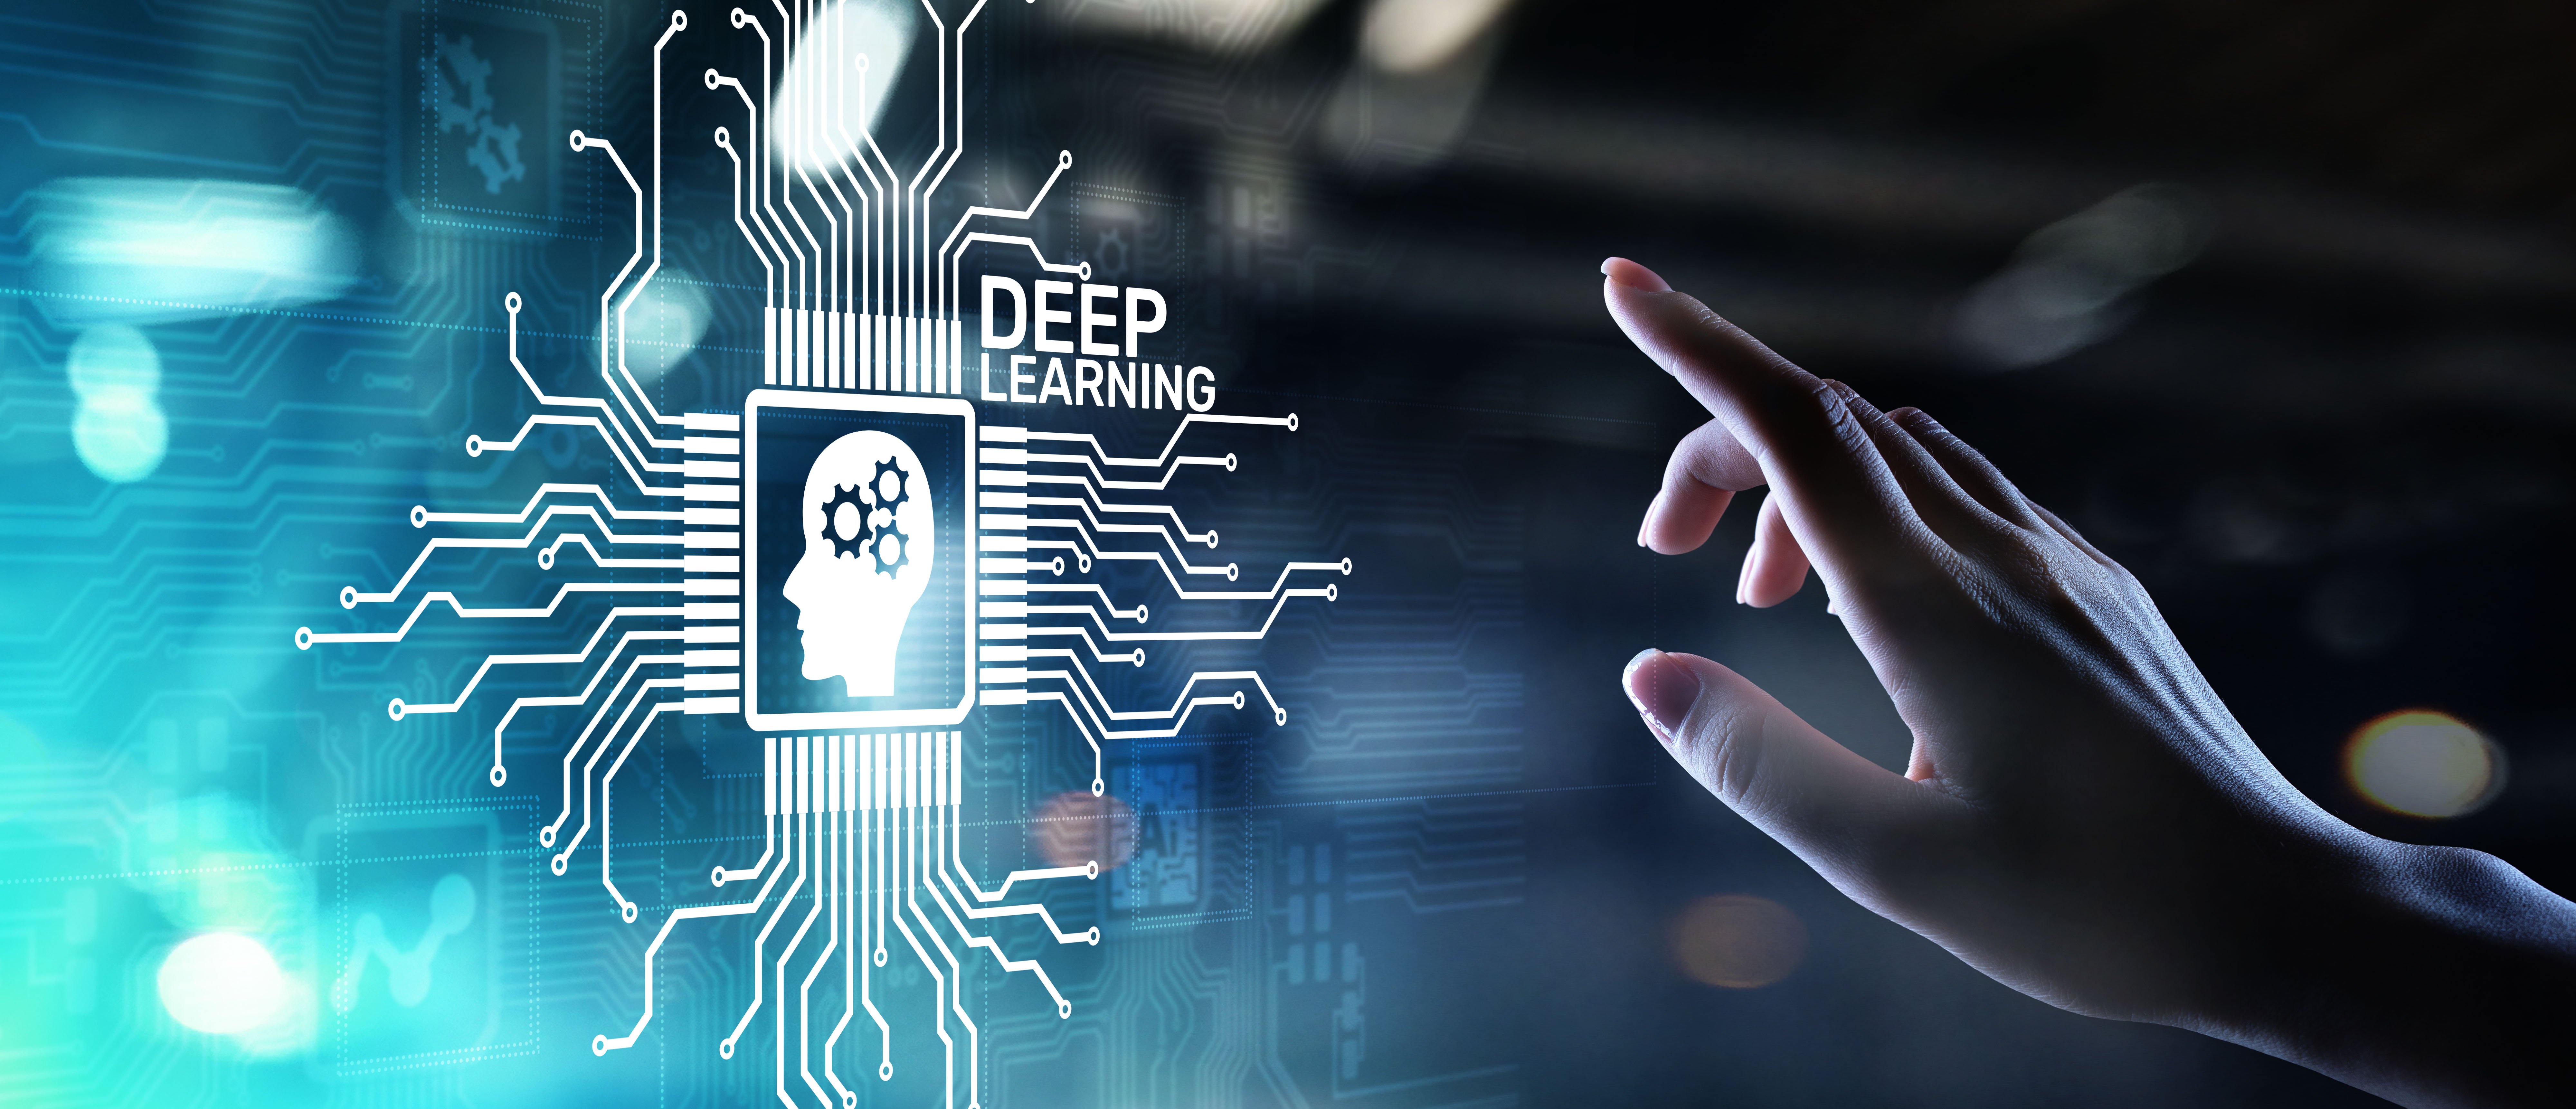 What is Deep Learning (DL)?